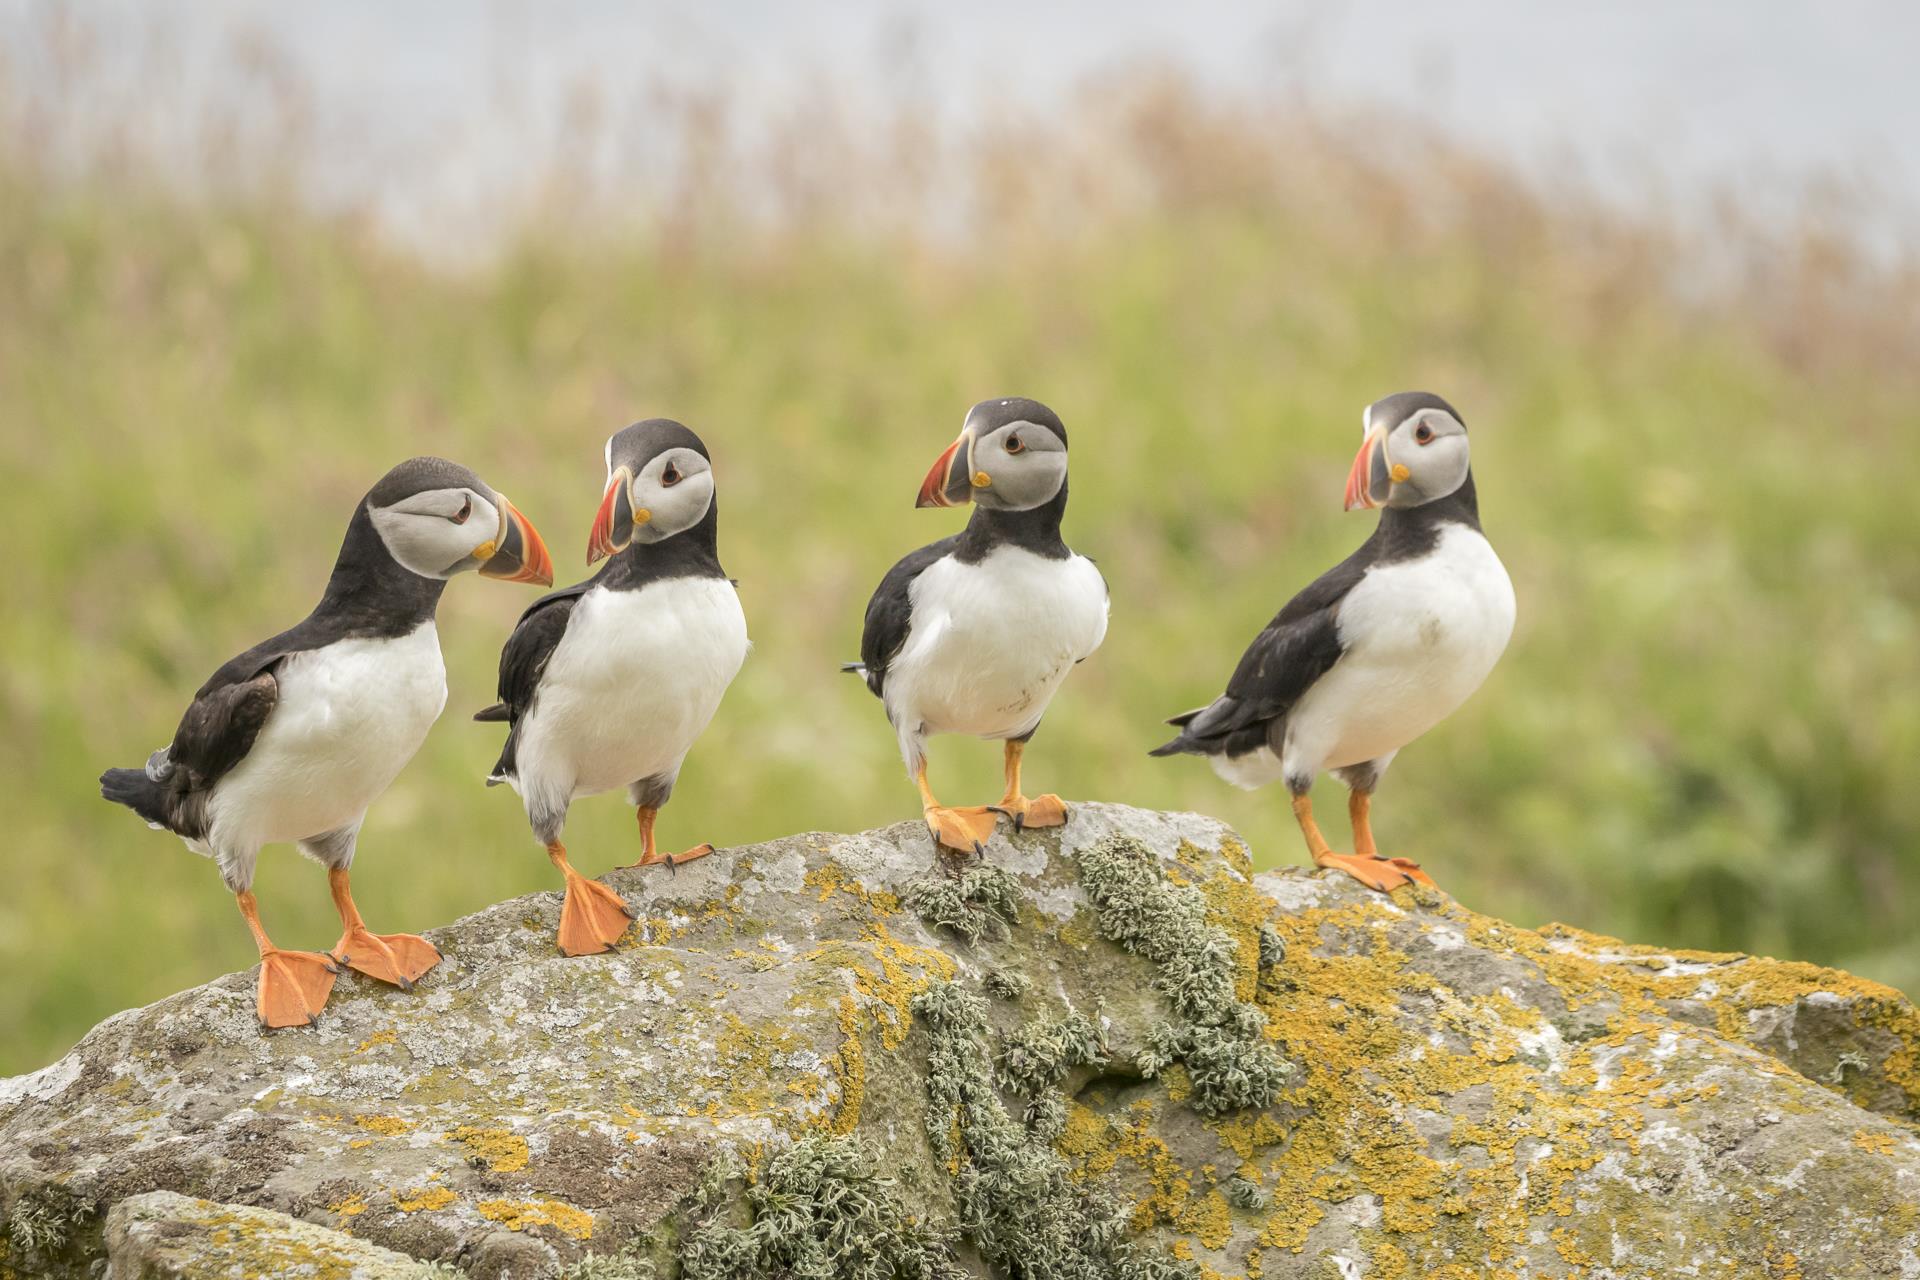 Help protect the Atlantic Puffin and the ecosystems they need to thrive